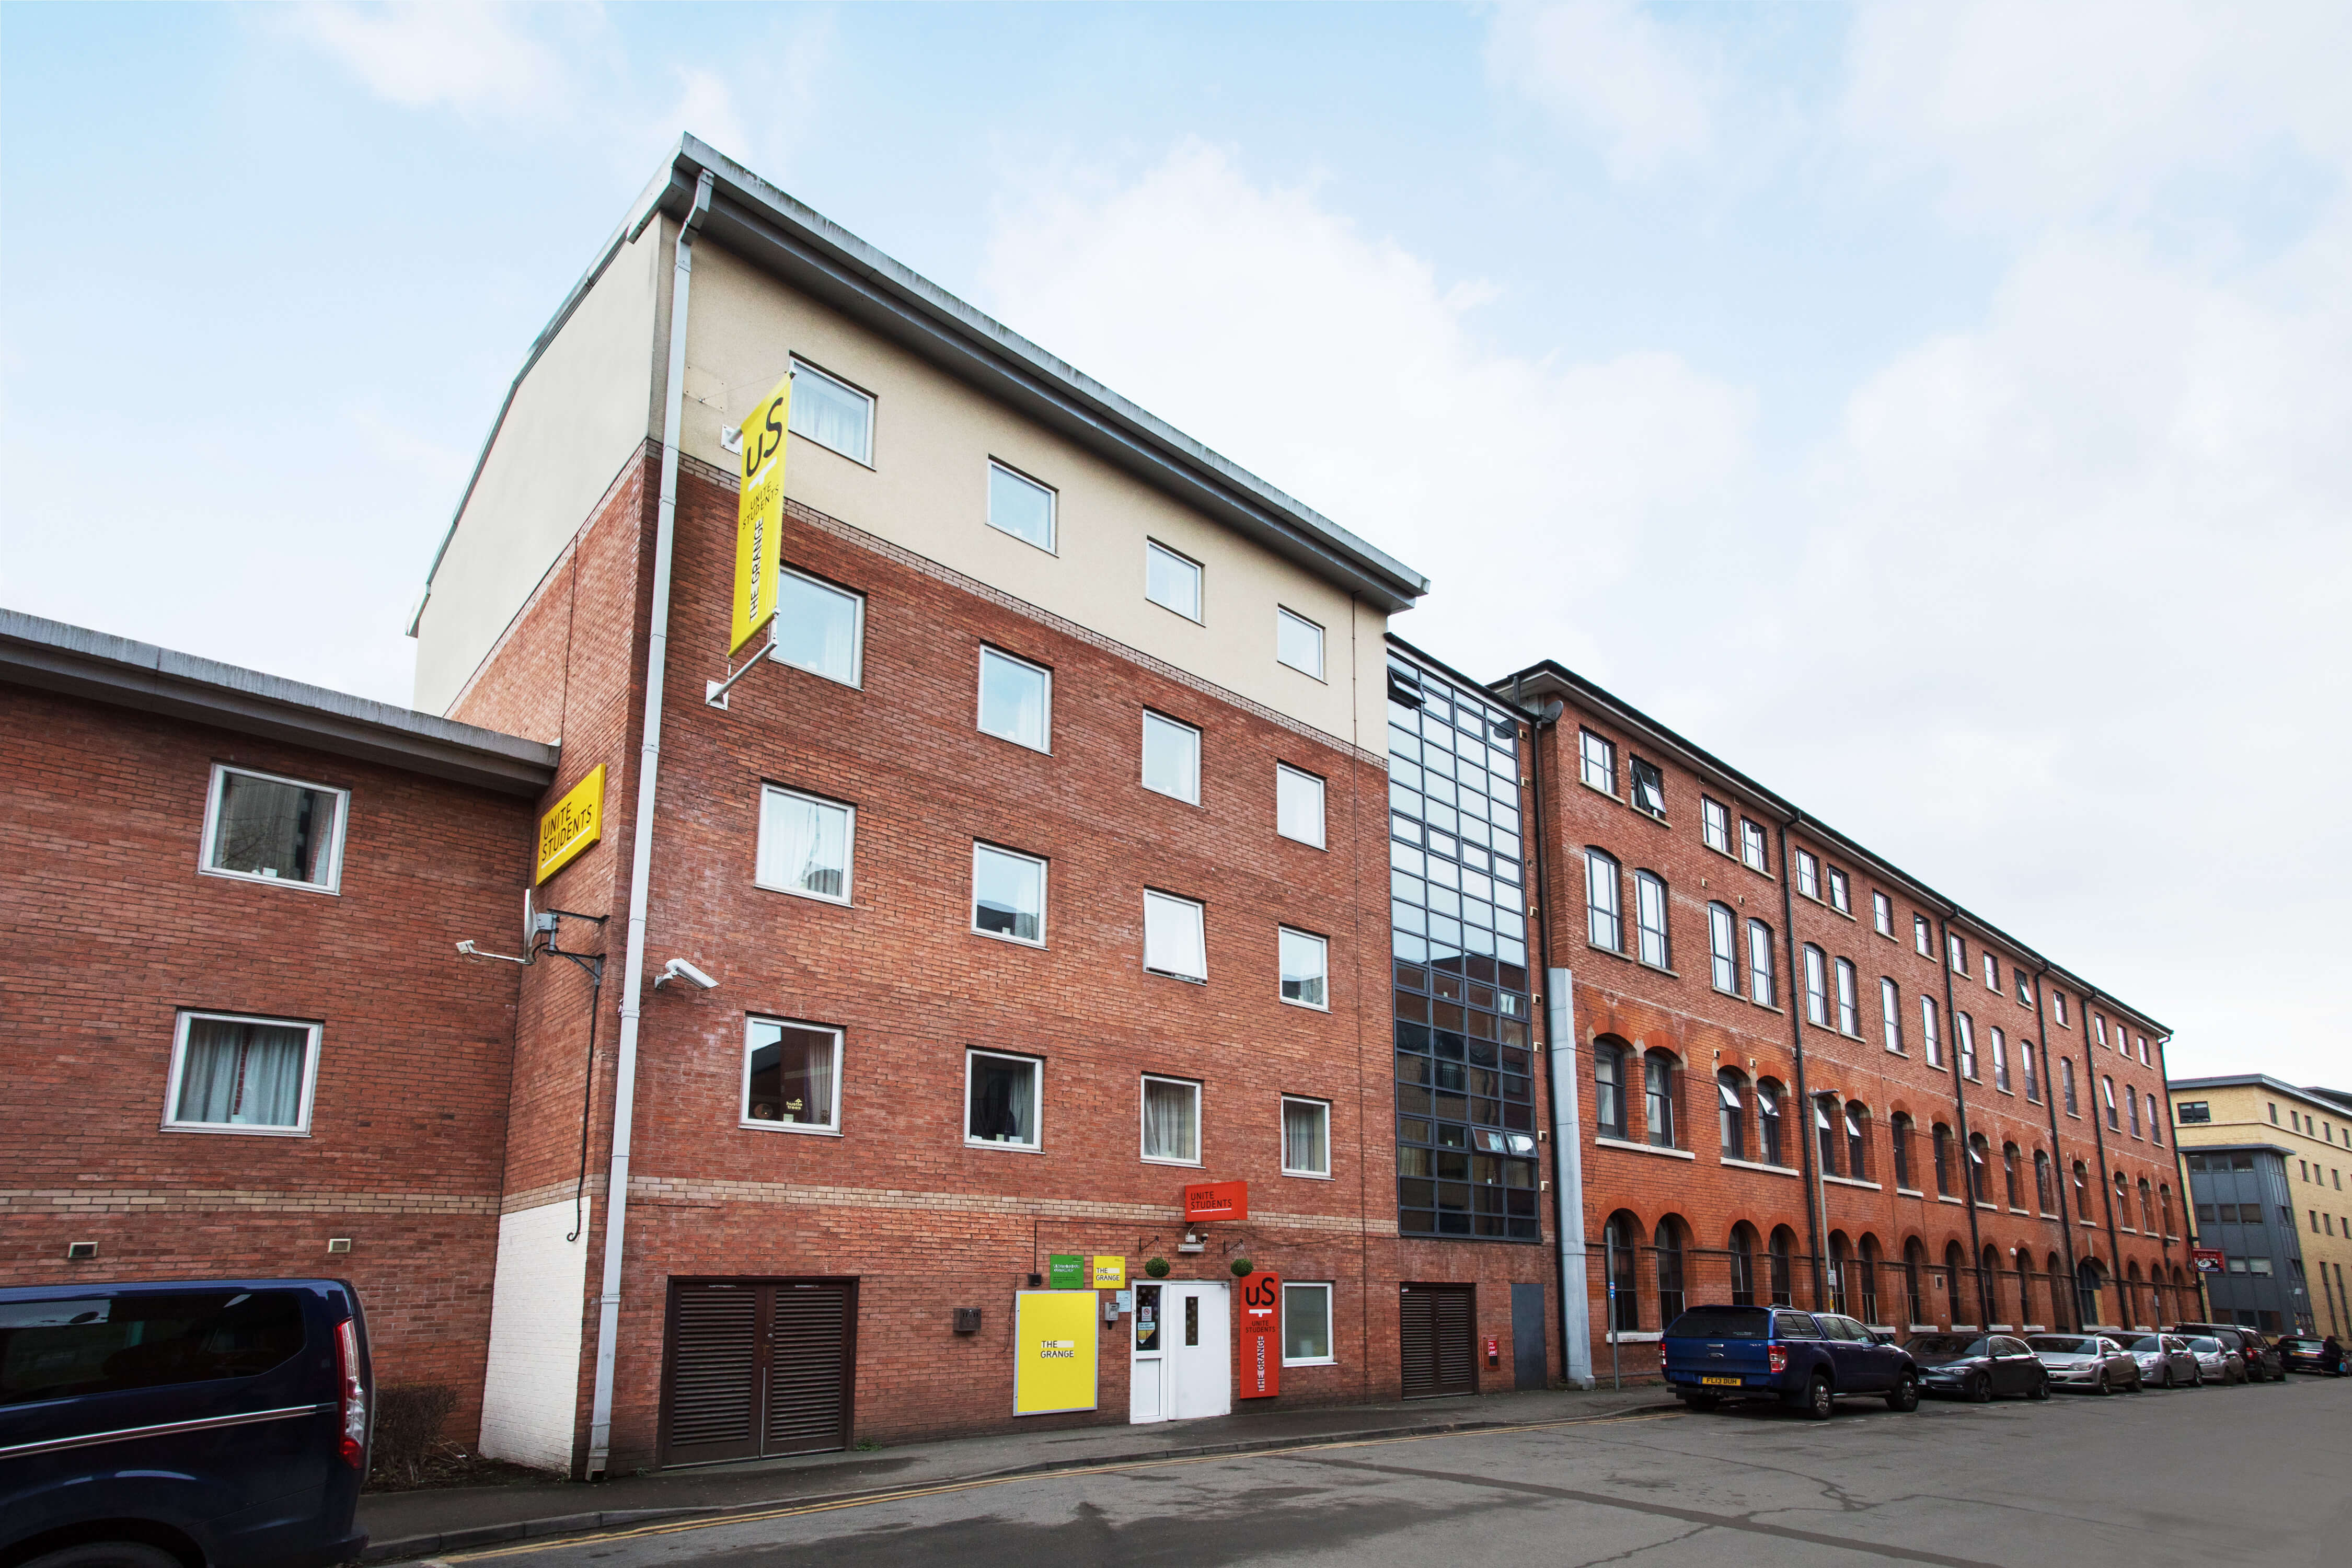 Unite Students accommodation at The Grange in Leicester